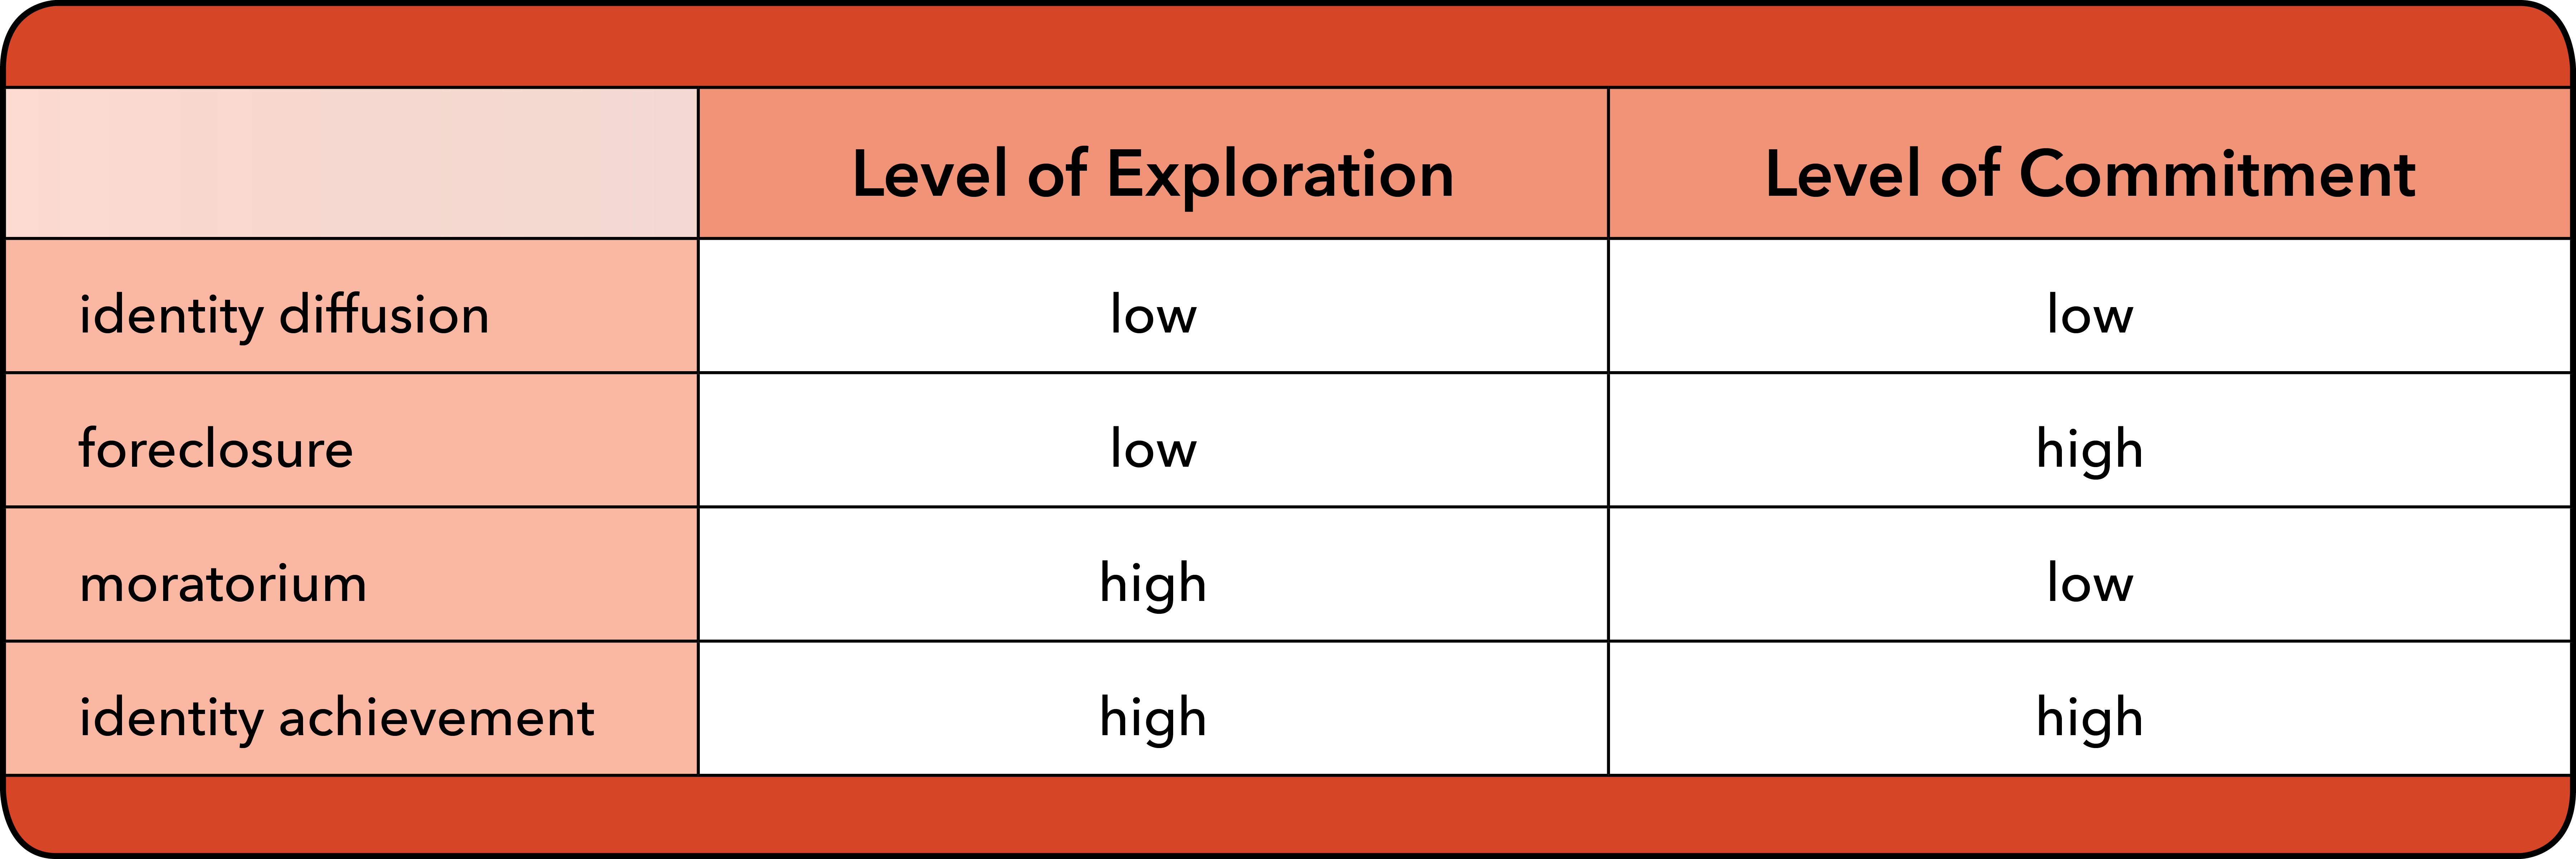 This table has 3 columns.  In the left-most column, there are listed Marcia’s 4 identity phases.  For each phase, the table shows a column for the level of exploration and the level of commitment.  For identity diffusion, “low” appears in the level of exploration column, and “low” appears in the level of commitment column.  For foreclosure, “low” appears in the level of exploration column, and “high” appears in the level of commitment column.  For moratorium, “high” appears in the level of exploration column, and “low” appears in the level of commitment column.  For identity achievement, “high” appears in the level of exploration column, and “high” appears in the level of commitment column.